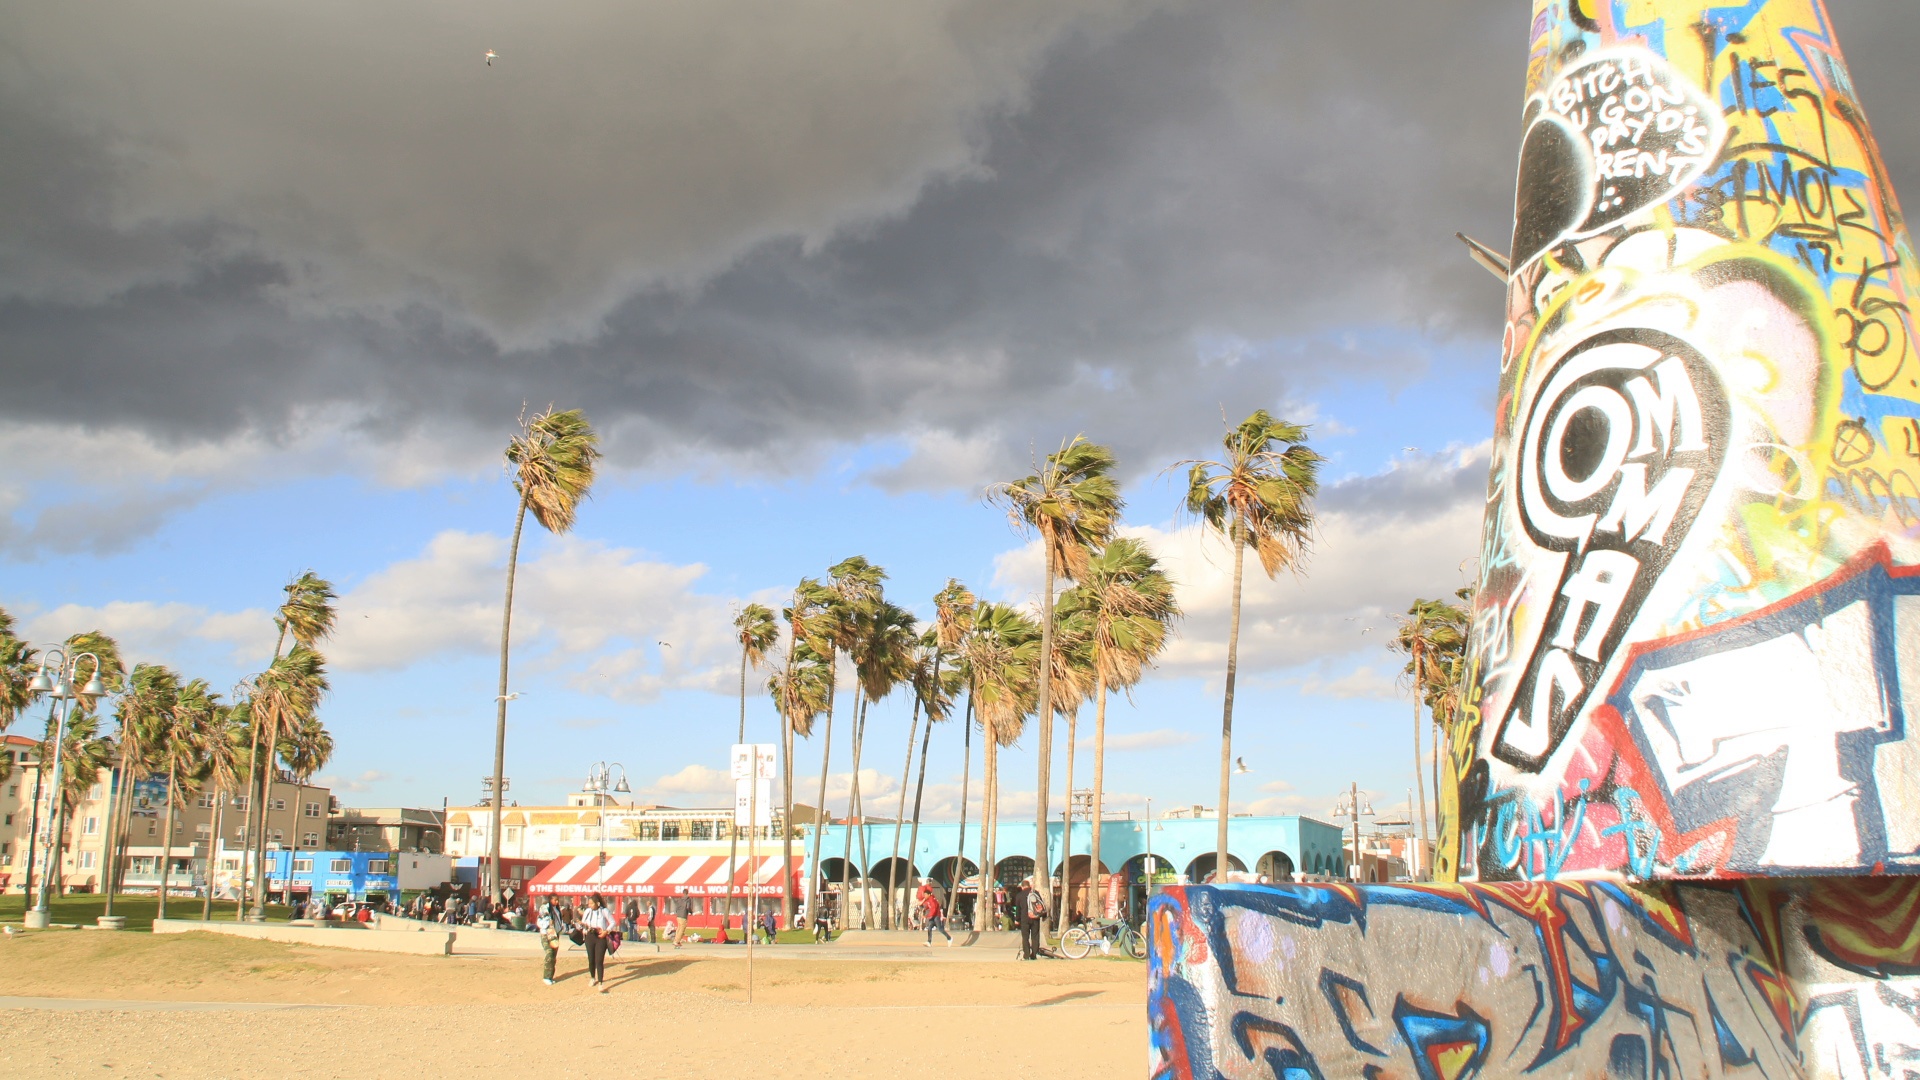 Venice Beach Art Work As Storm Moves In Timelapse Video